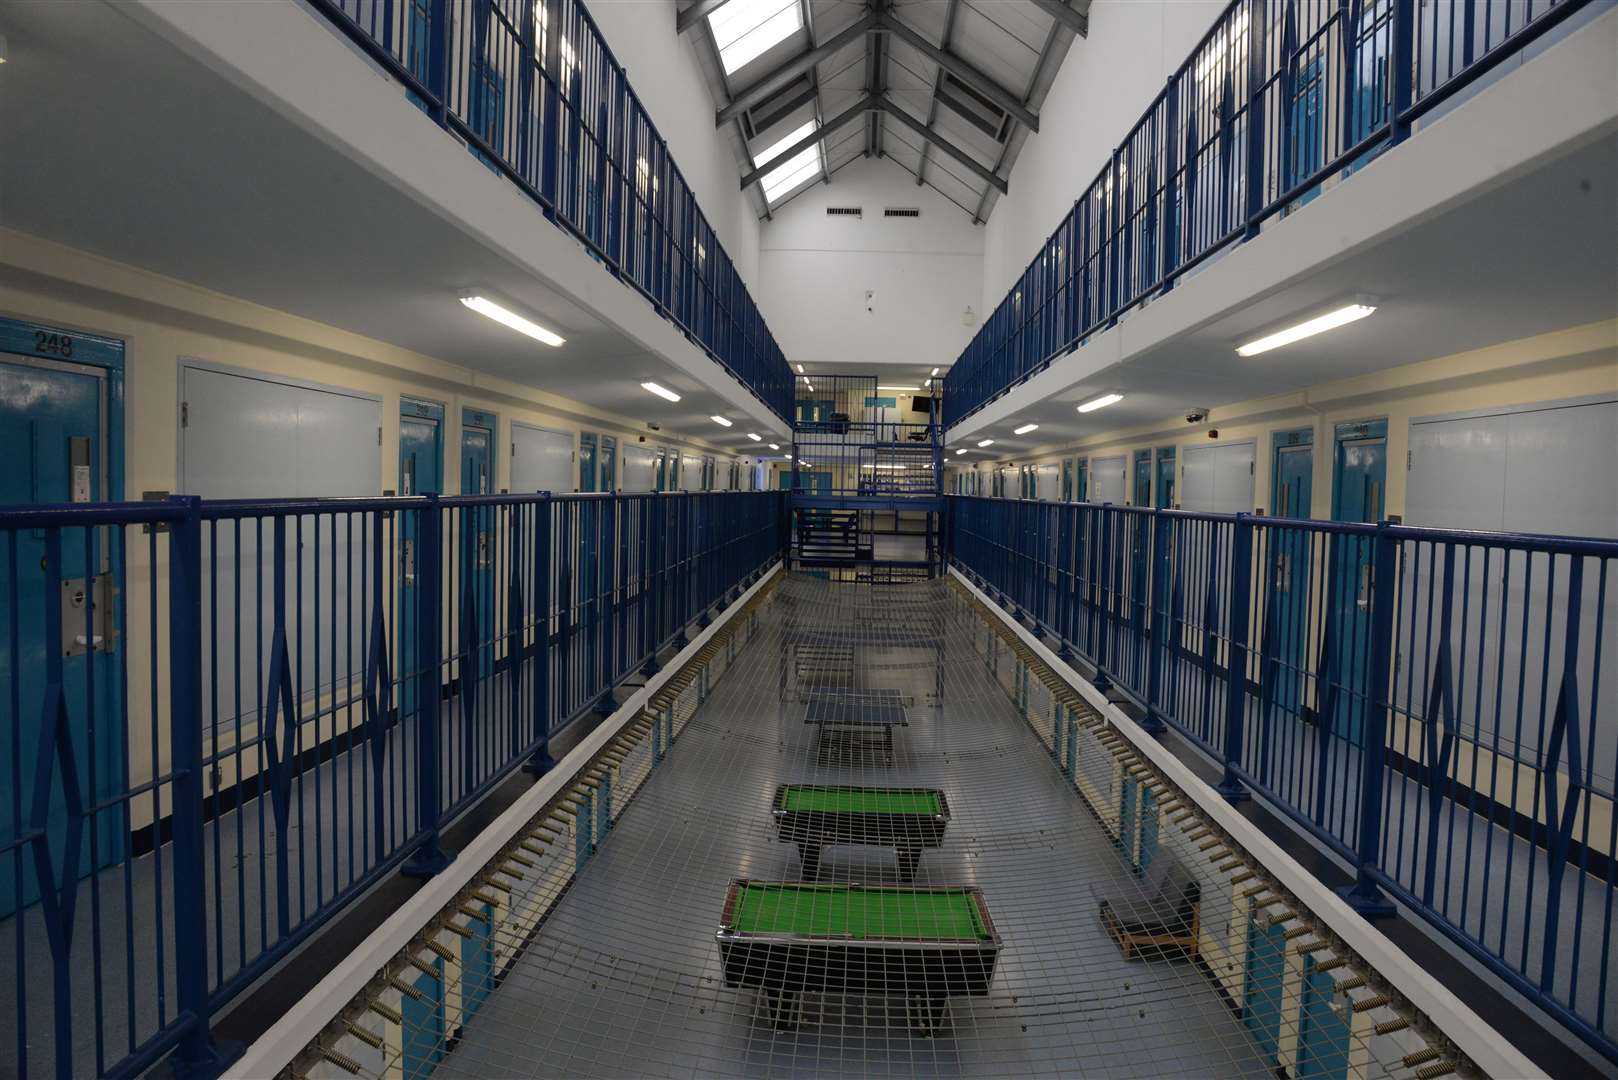 Many of the wings at HMP Swaleside have been refurbished. Picture: Chris Davey